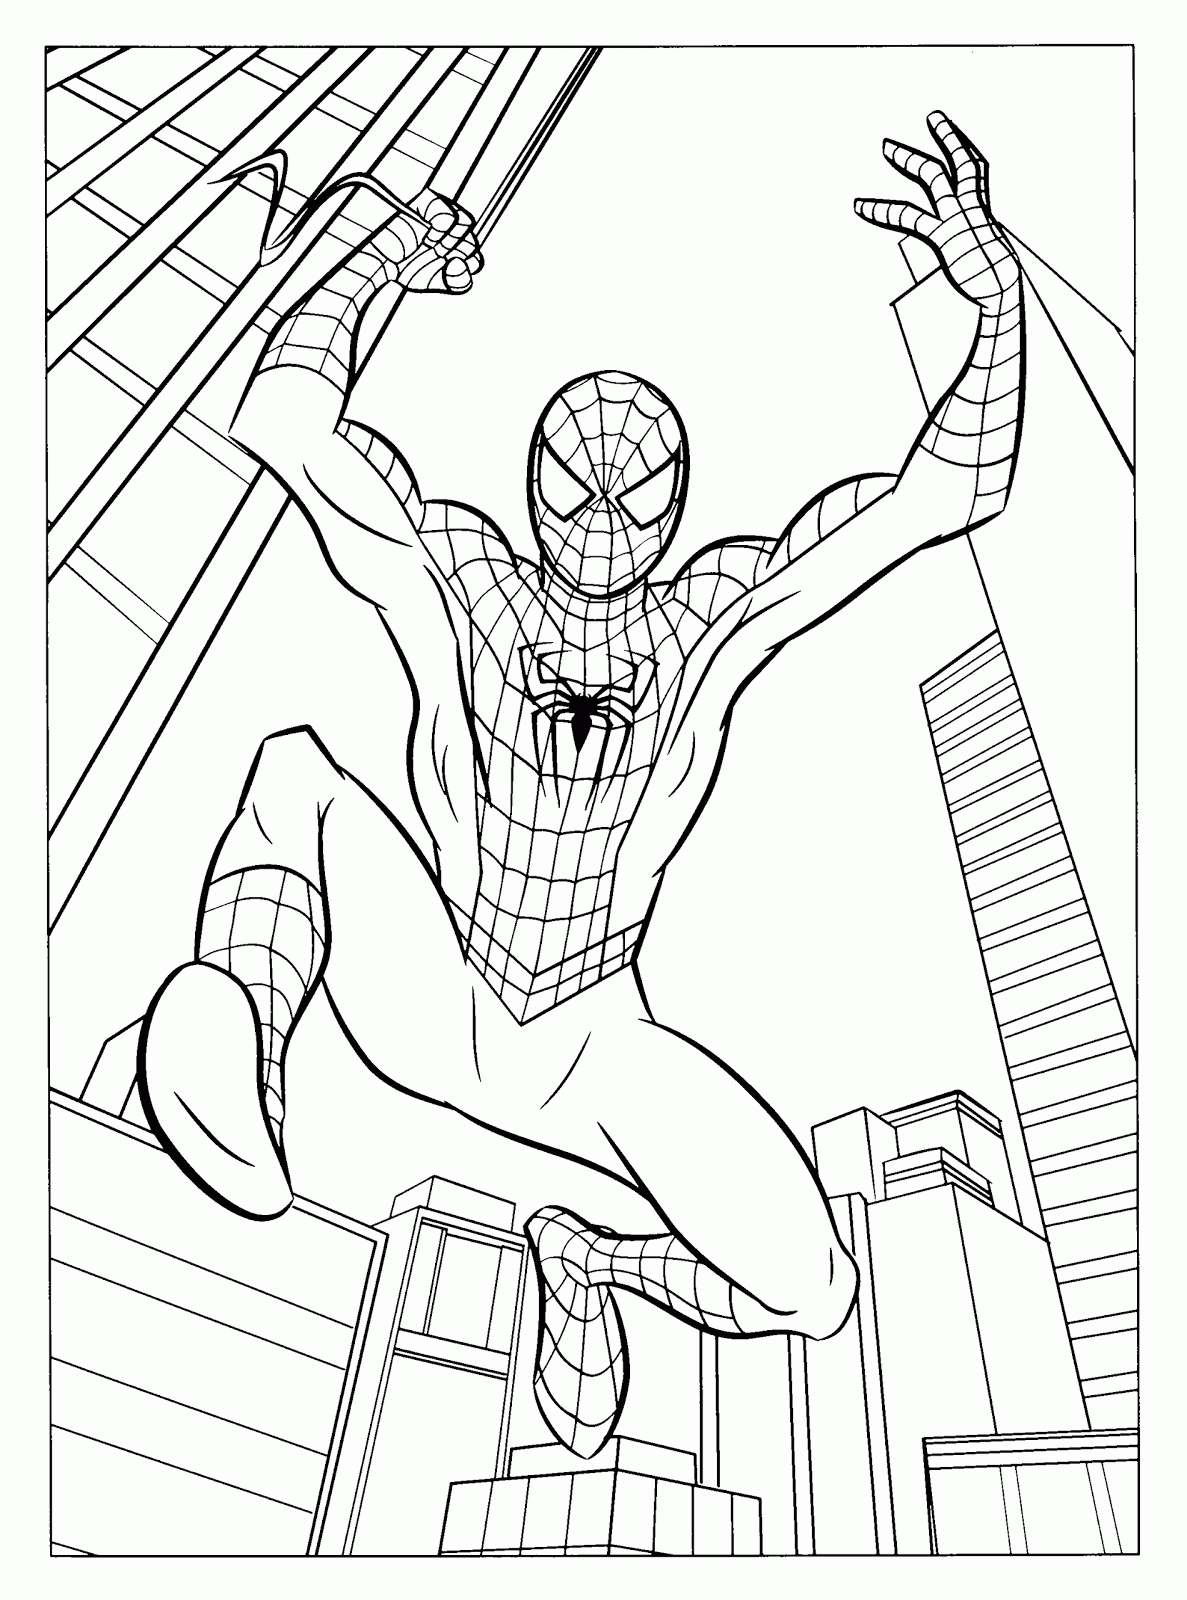 Coloring page: DC Comics Super Heroes (Superheroes) #80440 - Free Printable Coloring Pages